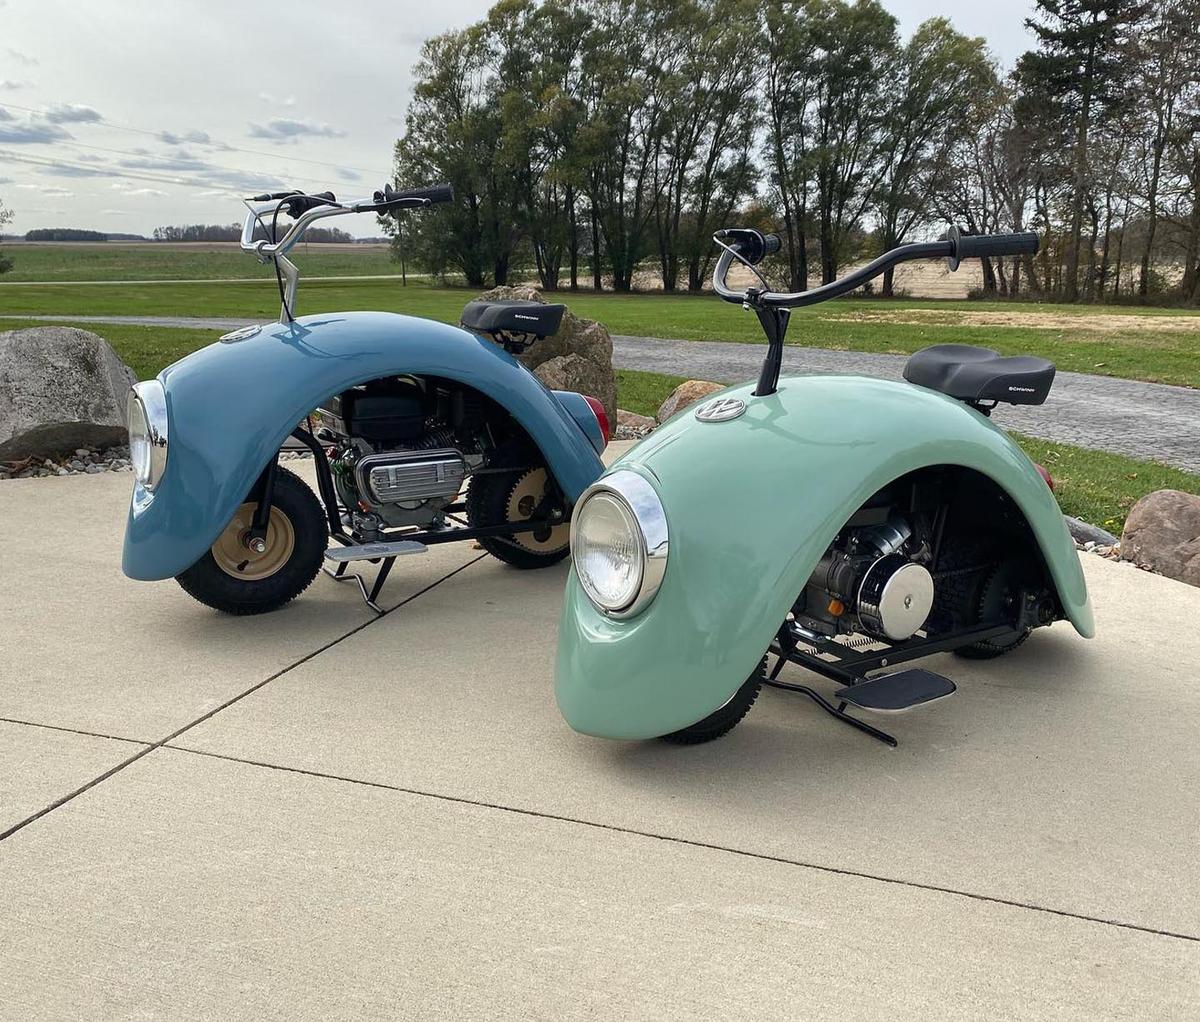 Volkspods, created by 47-year-old Huntingdon, Indiana, inventor Brent Walter. (Courtesy of <a href="https://www.instagram.com/walter_werks/">Brent Walter</a>)